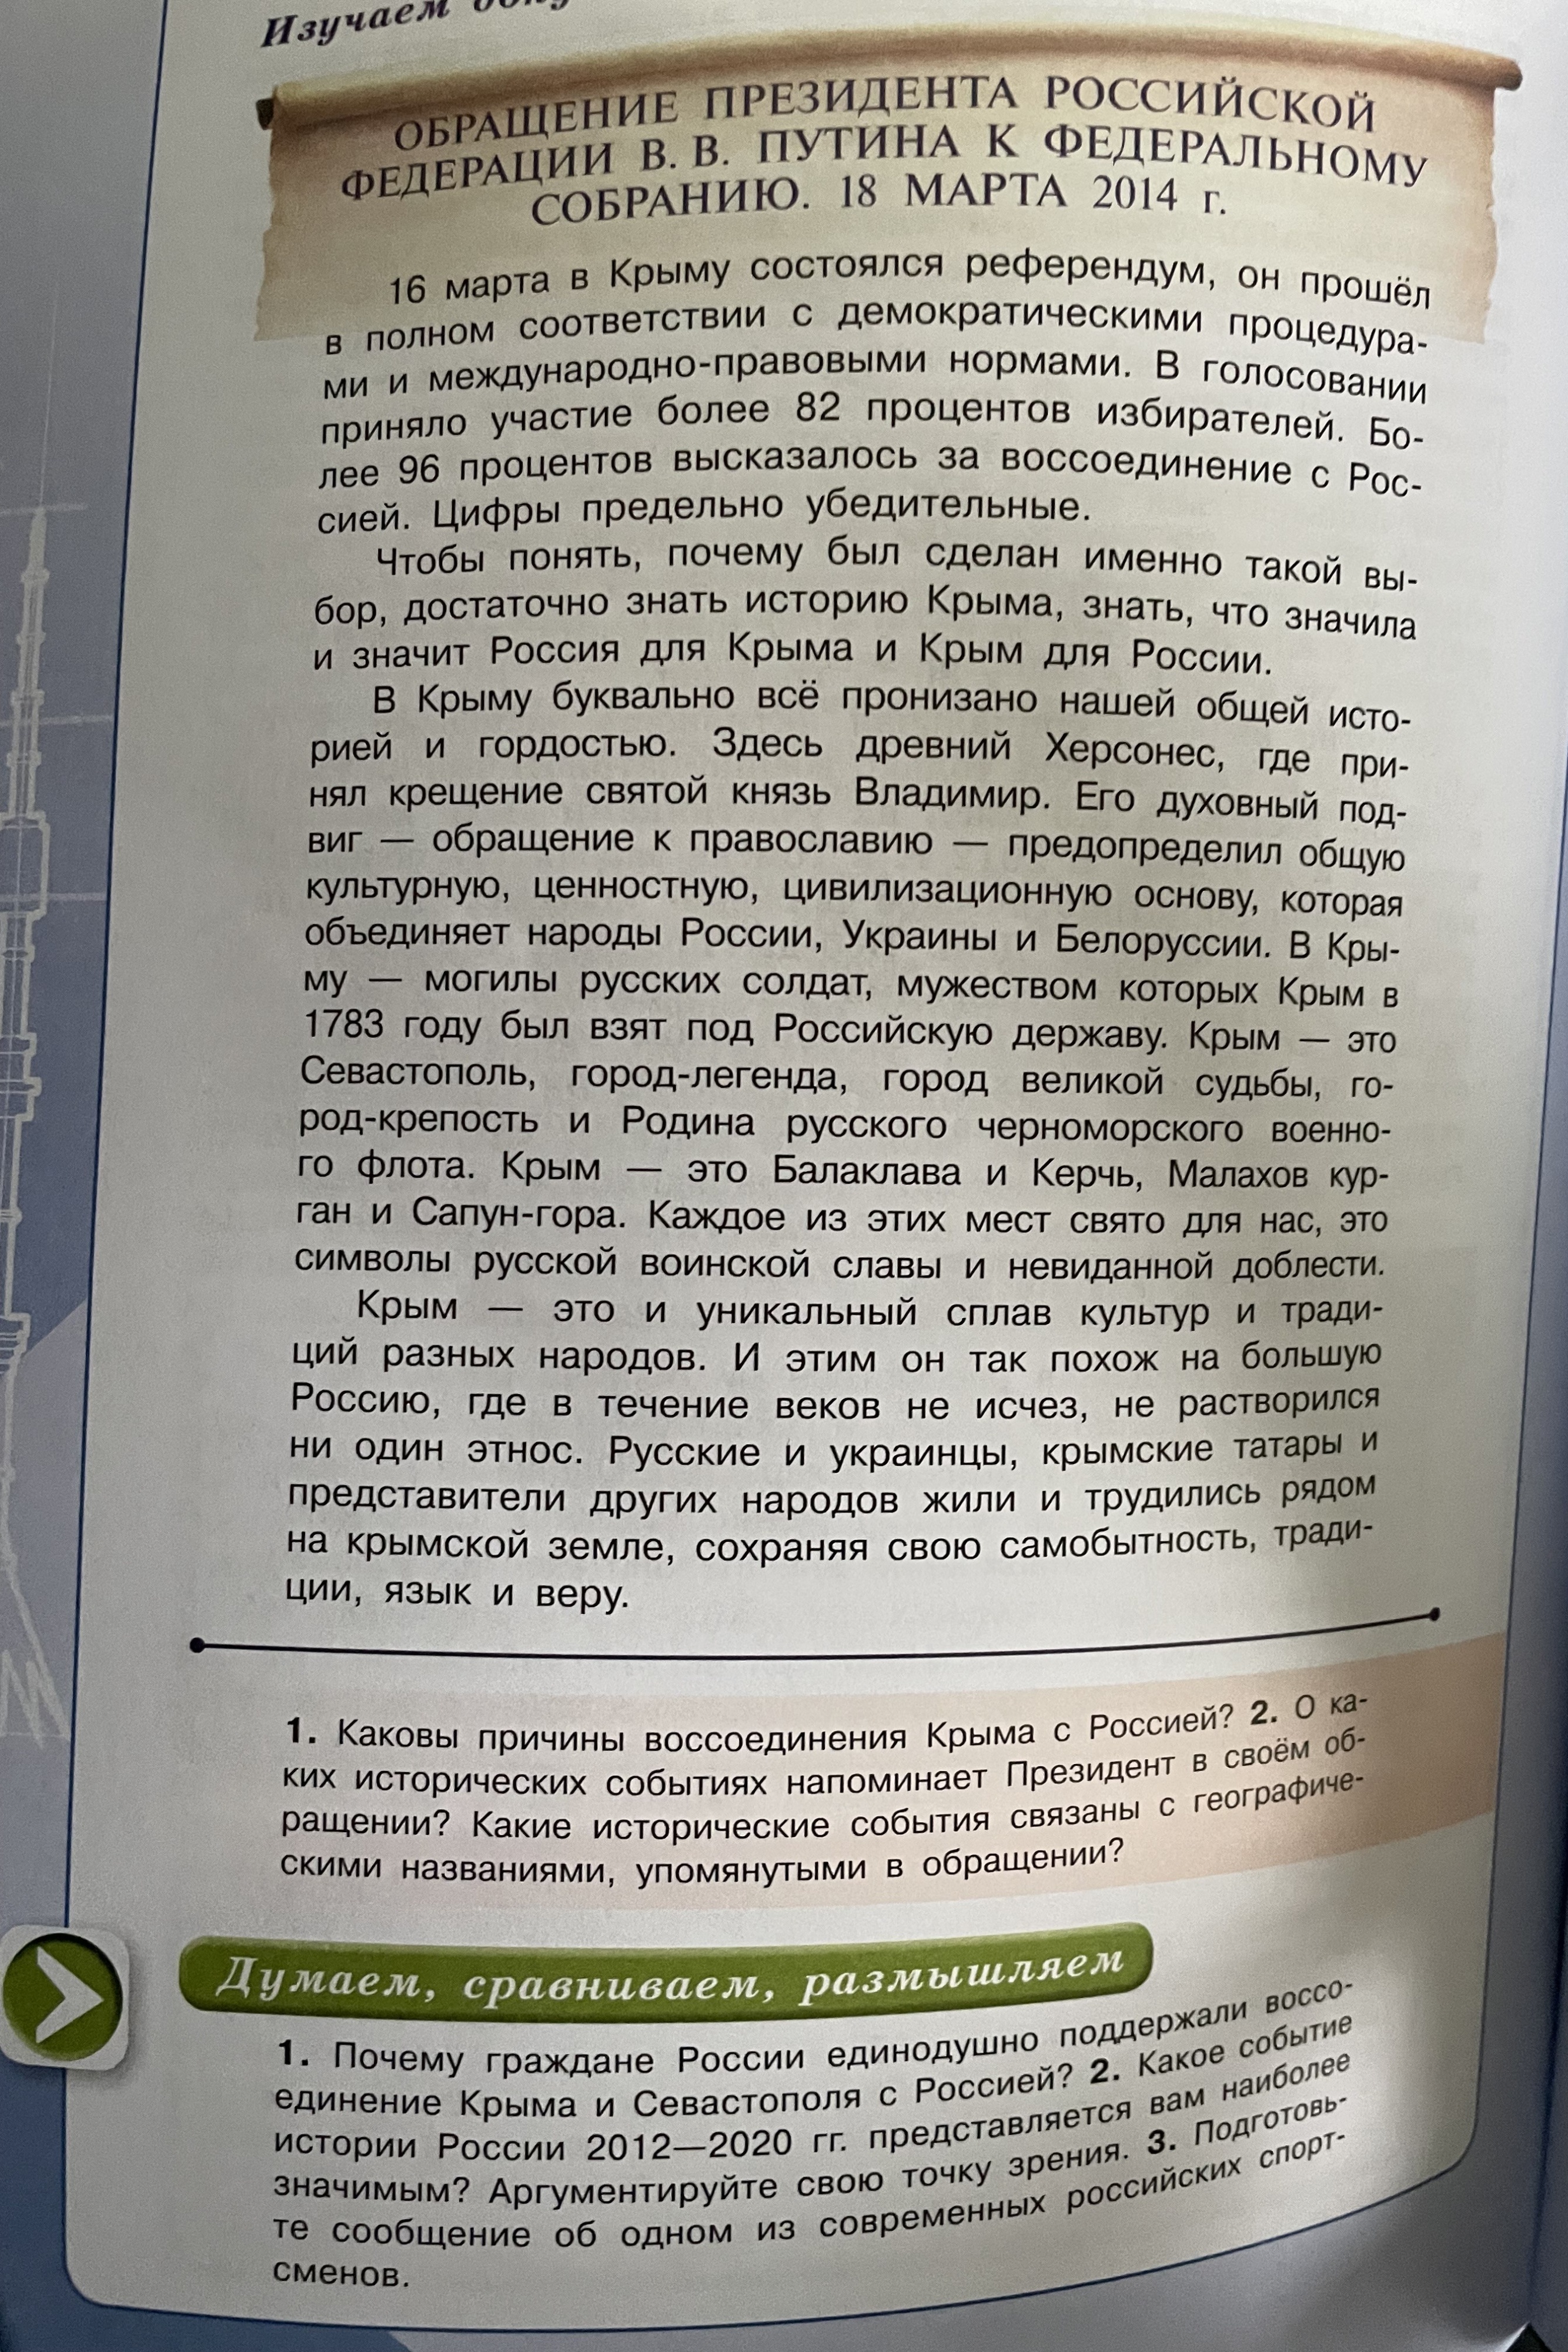 A textbook page in Russian